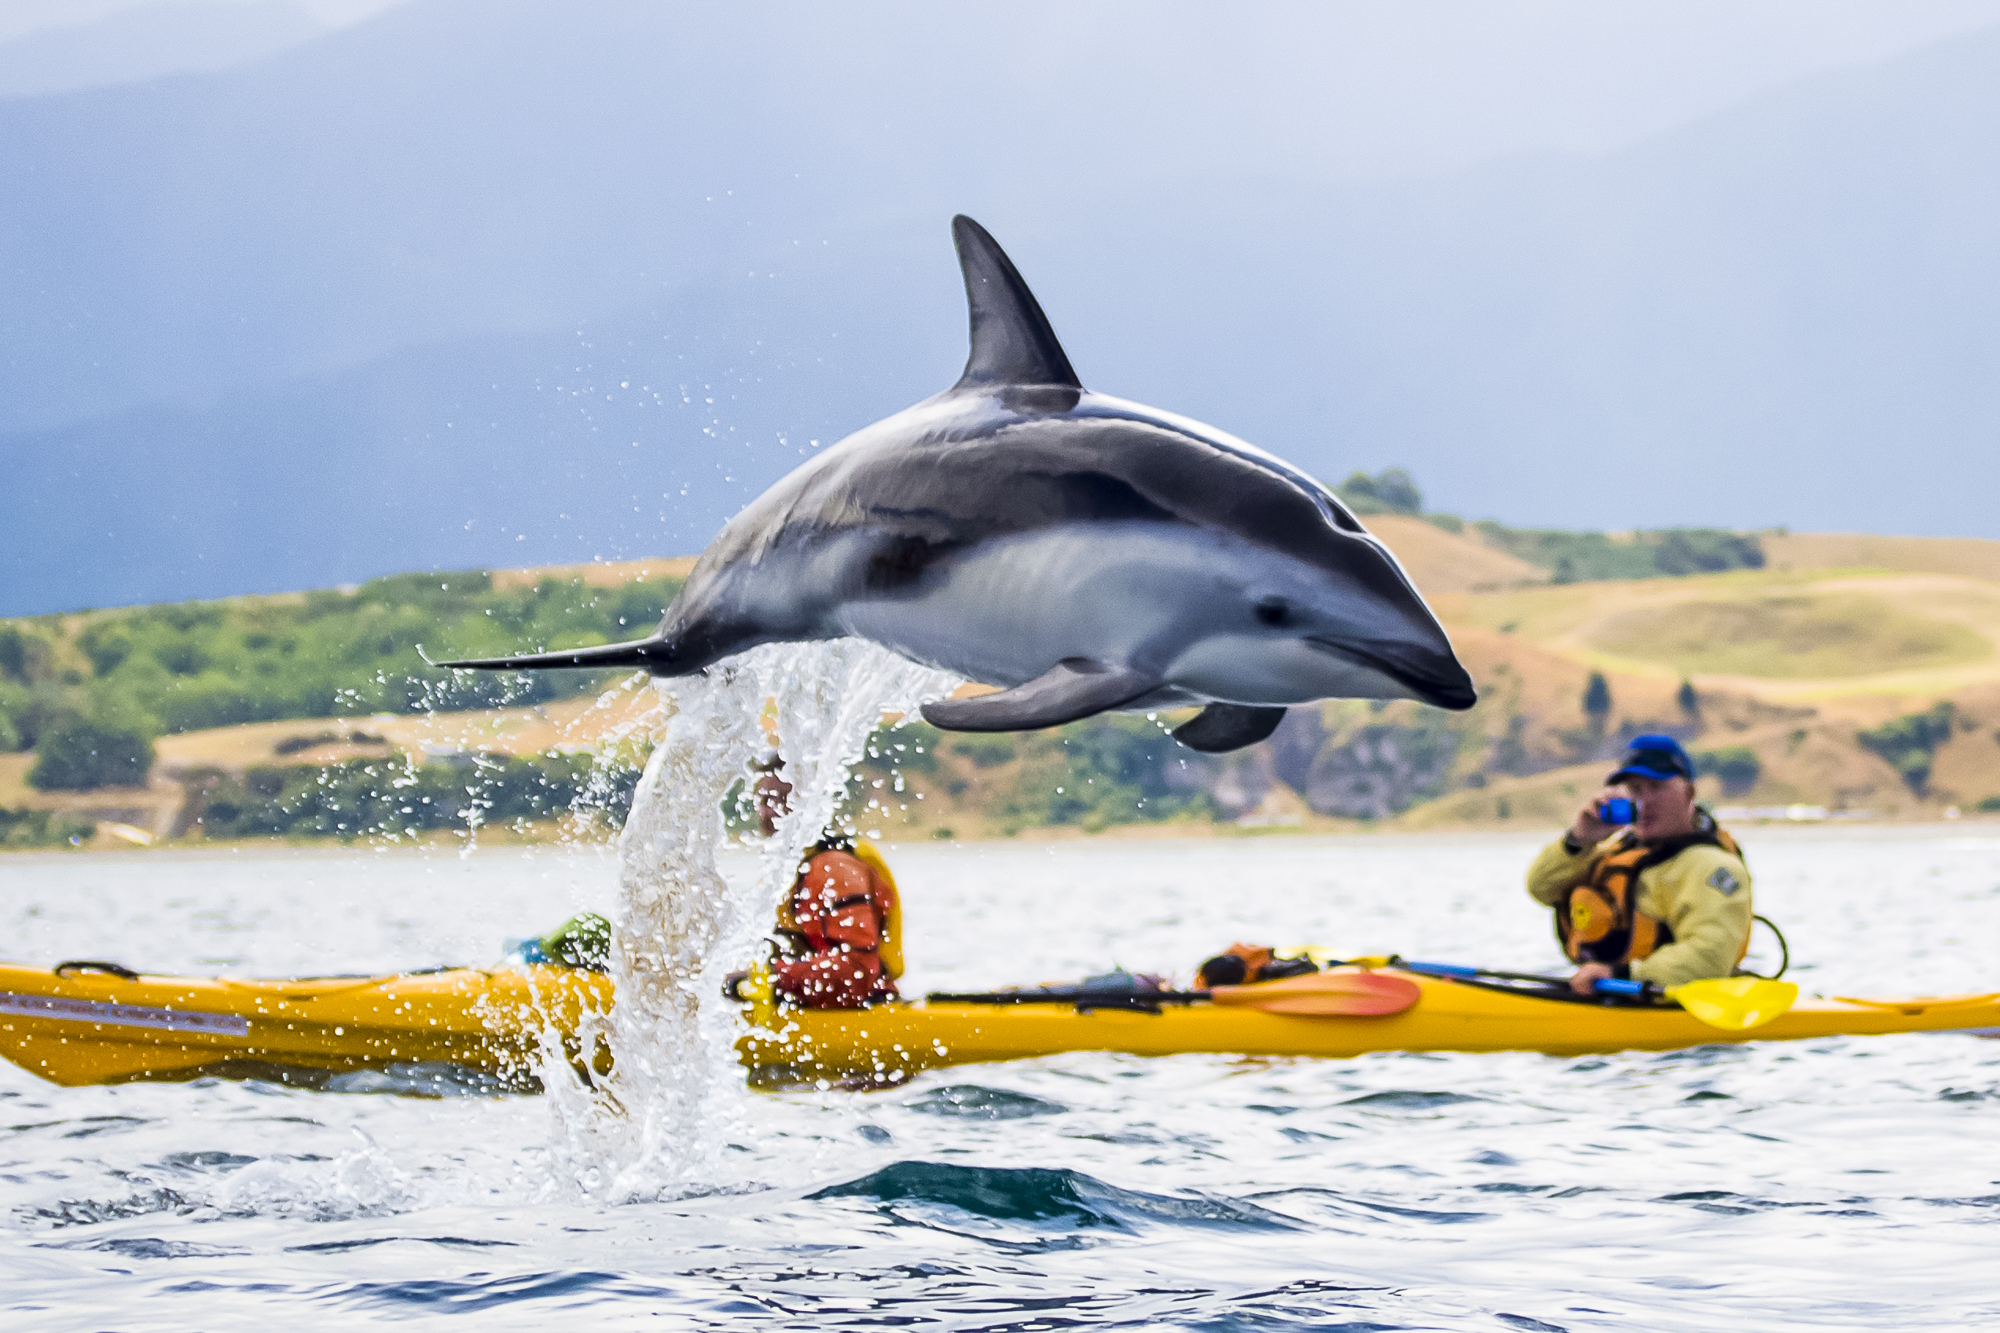 Sea kayakers have close encounters with the Fur Seals, Blue Pengiuns and Dusky Dolphins along the Kaikoura coastline.